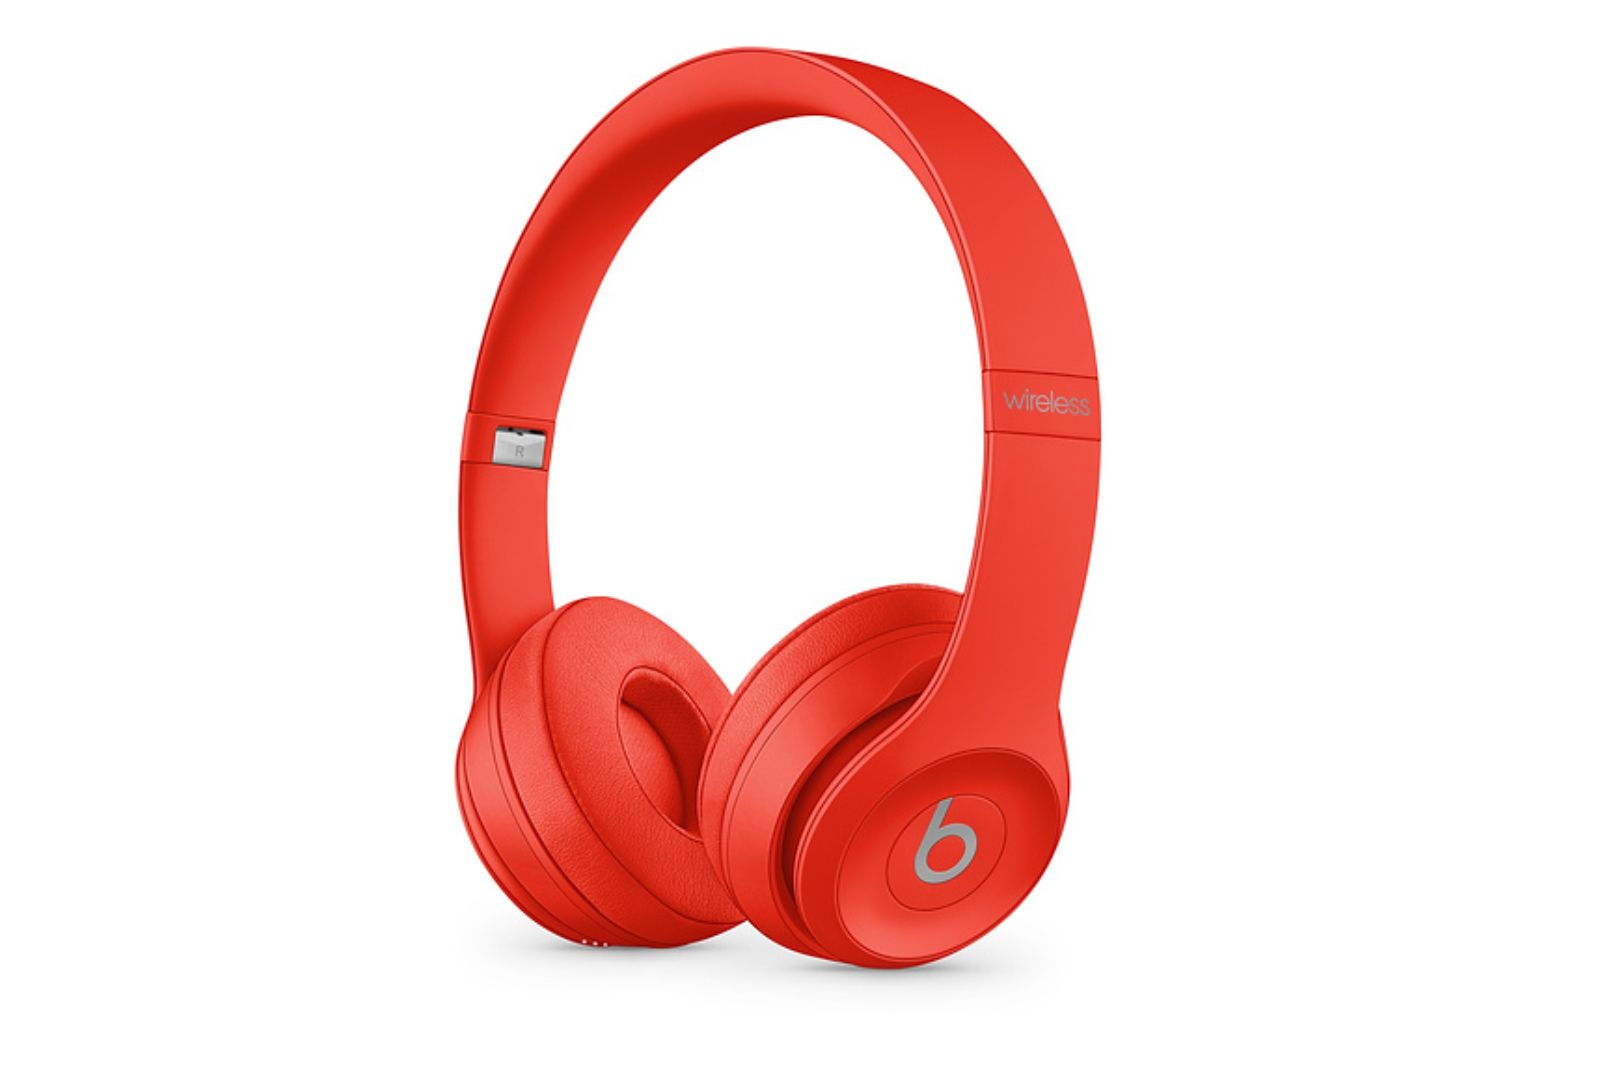 Great Productred Gadgets To Help You Show Your Support For World Aids Day image 6